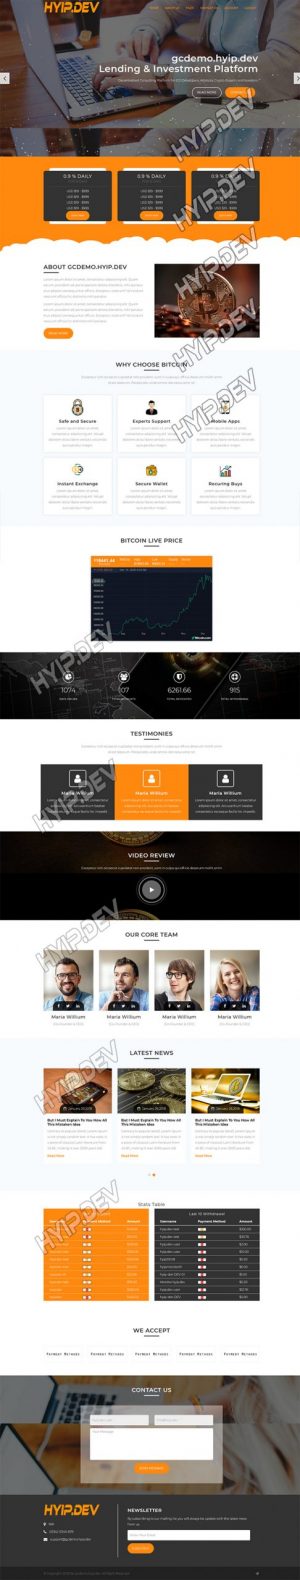 goldcoders hyip template no. 189, home page screenshot